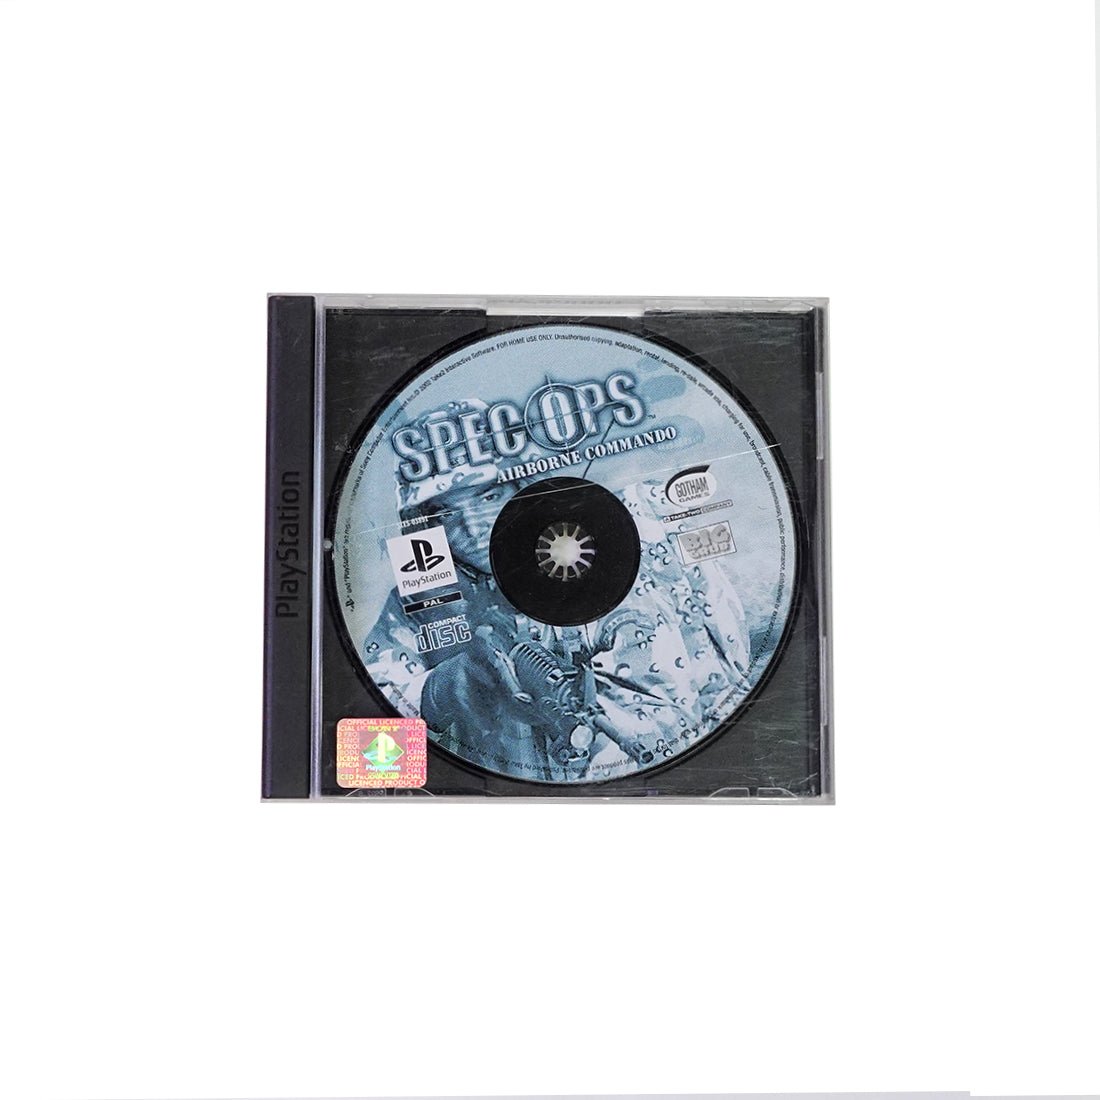 (Pre-Owned) Spec Ops: Airborne Commando Game - PlayStation 1 - ريترو - Store 974 | ستور ٩٧٤